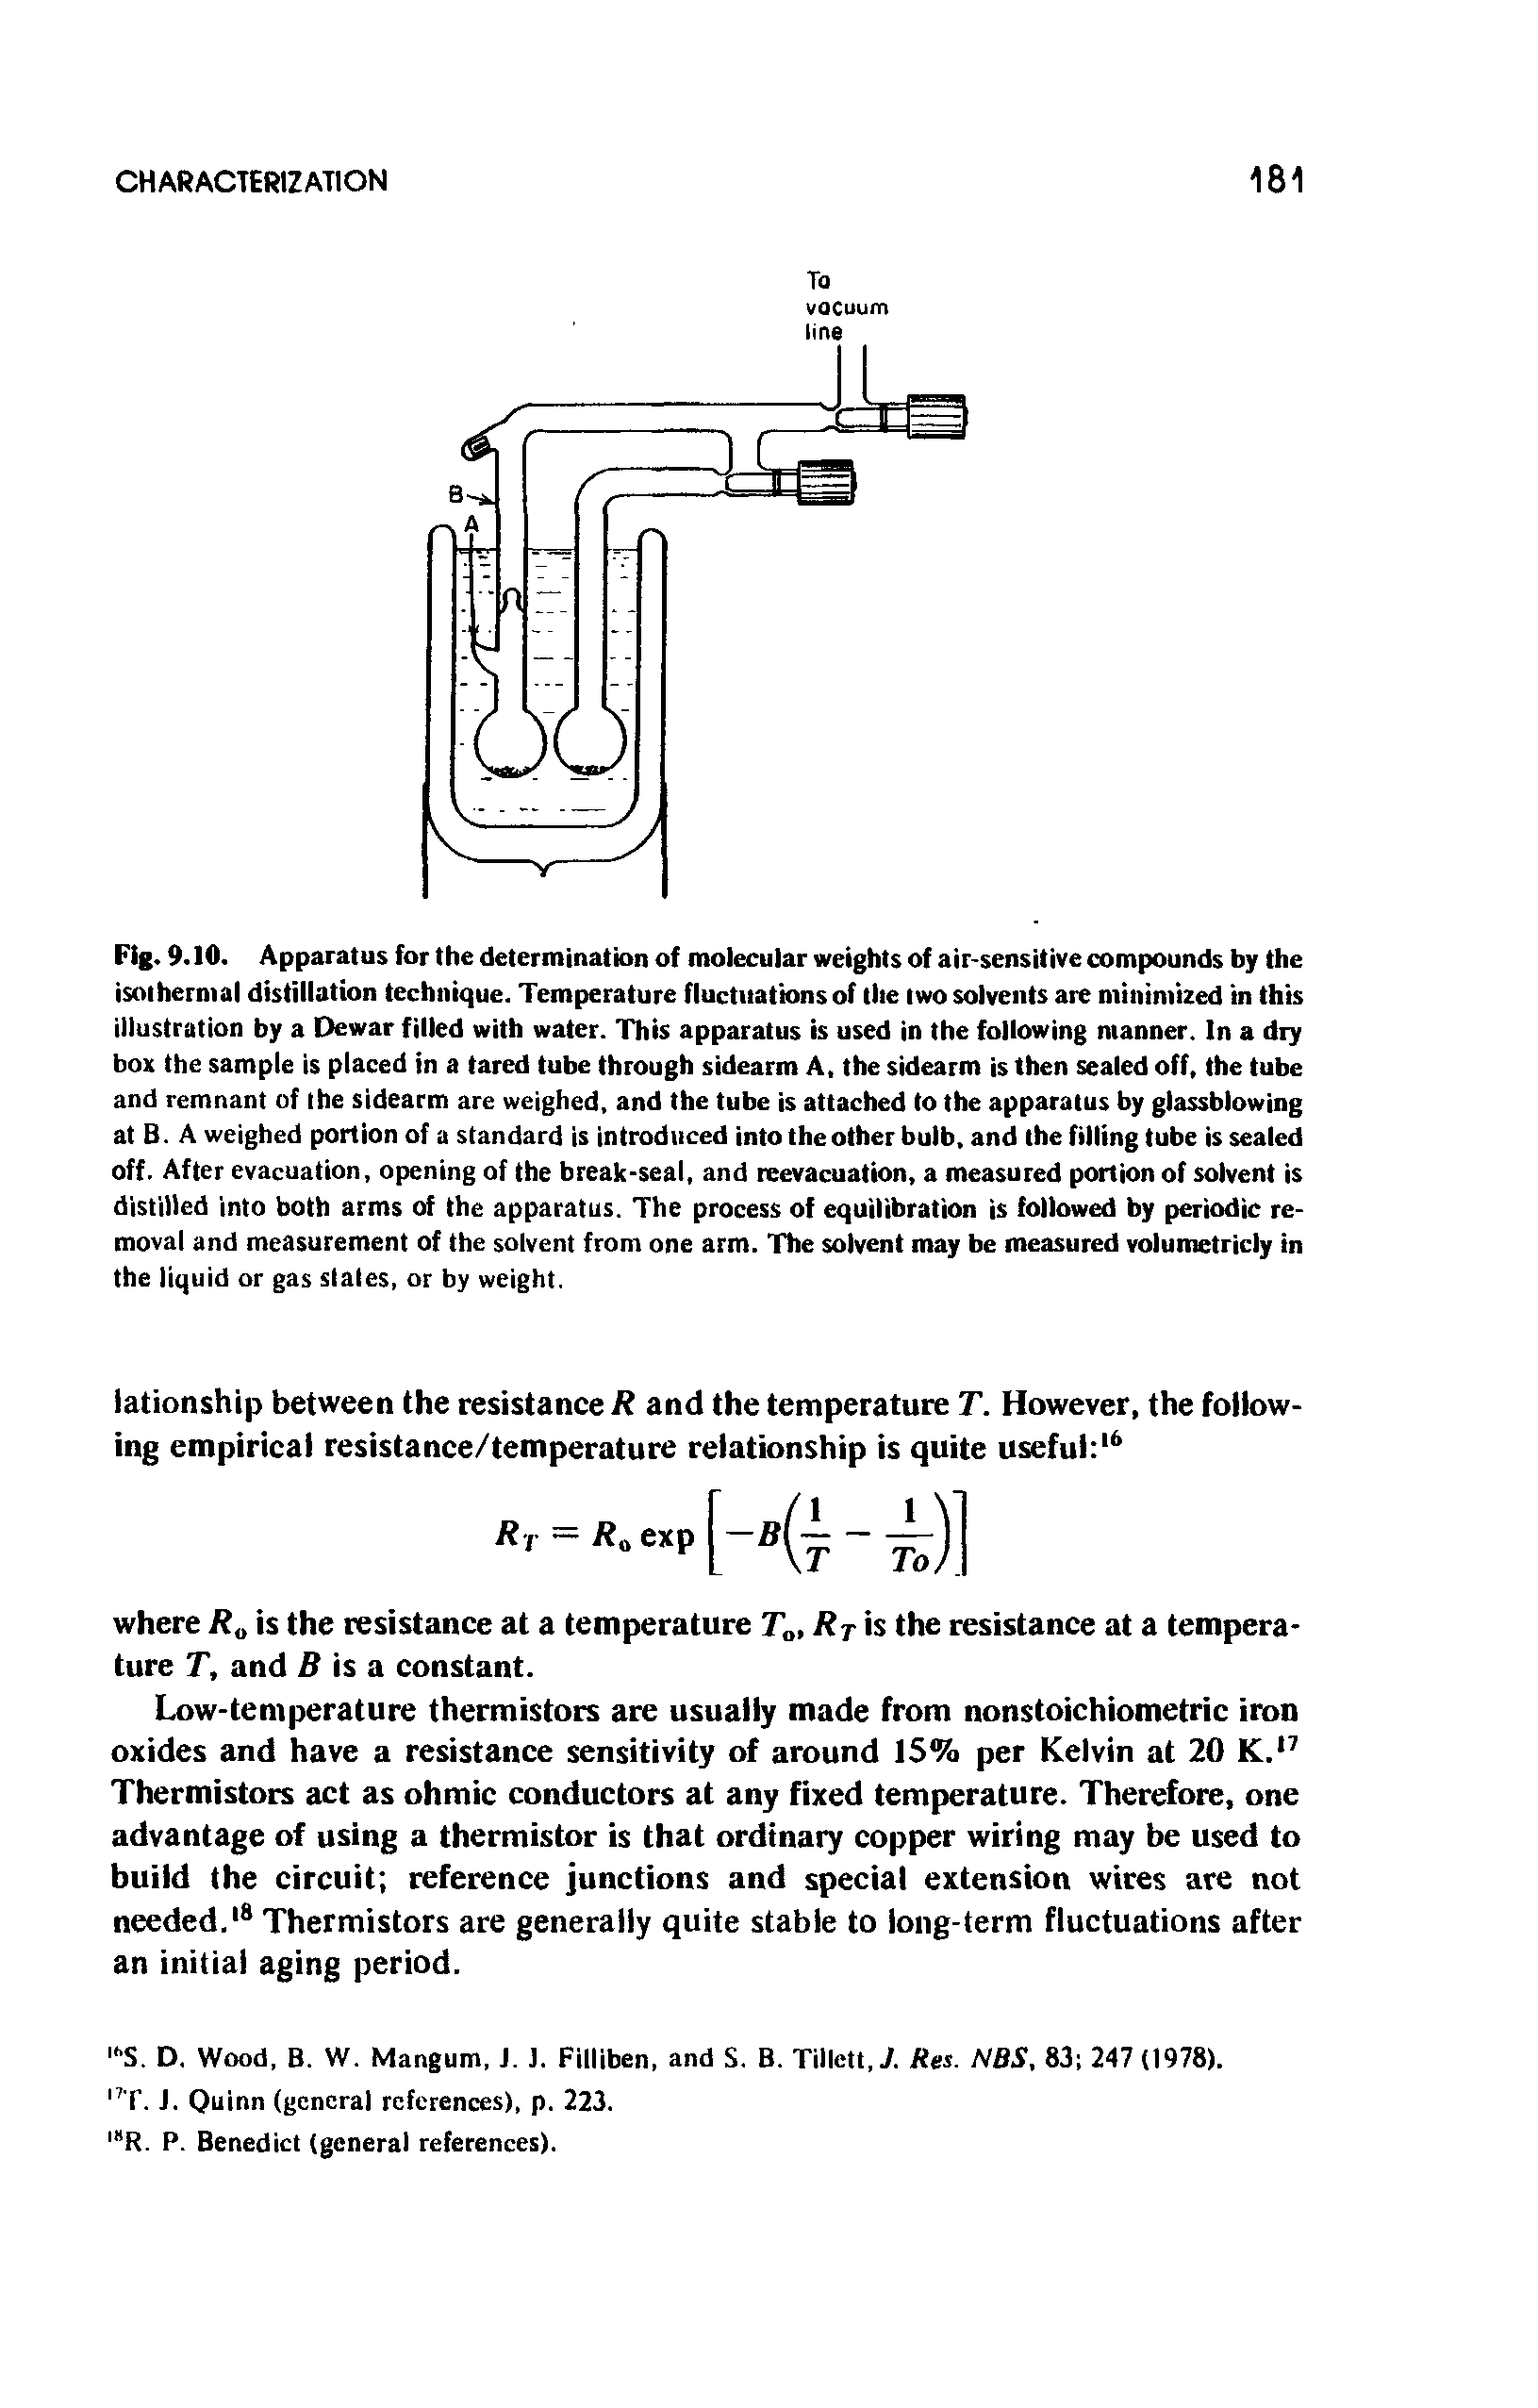 Fig. 9.10. Apparatus for the determination of molecular weights of air-sensitive compounds by the isothermal distillation technique. Temperature fluctuations of the two solvents are minimized in this illustration by a Dewar filled with water. This apparatus is used in the following manner. In a dry box the sample is placed in a tared tube through sidearm A, the sidearm is then sealed off, the tube and remnant of the sidearm are weighed, and the tube is attached to the apparatus by glassblowing at B. A weighed portion of a standard is introduced into the other bulb, and the filling tube is sealed off. After evacuation, opening of the break-seal, and reevacuation, a measured portion of solvent is distilled into both arms of the apparatus. The process of equilibration is followed by periodic removal and measurement of the solvent from one arm. The solvent may be measured volumetricly in the liquid or gas stales, or by weight.